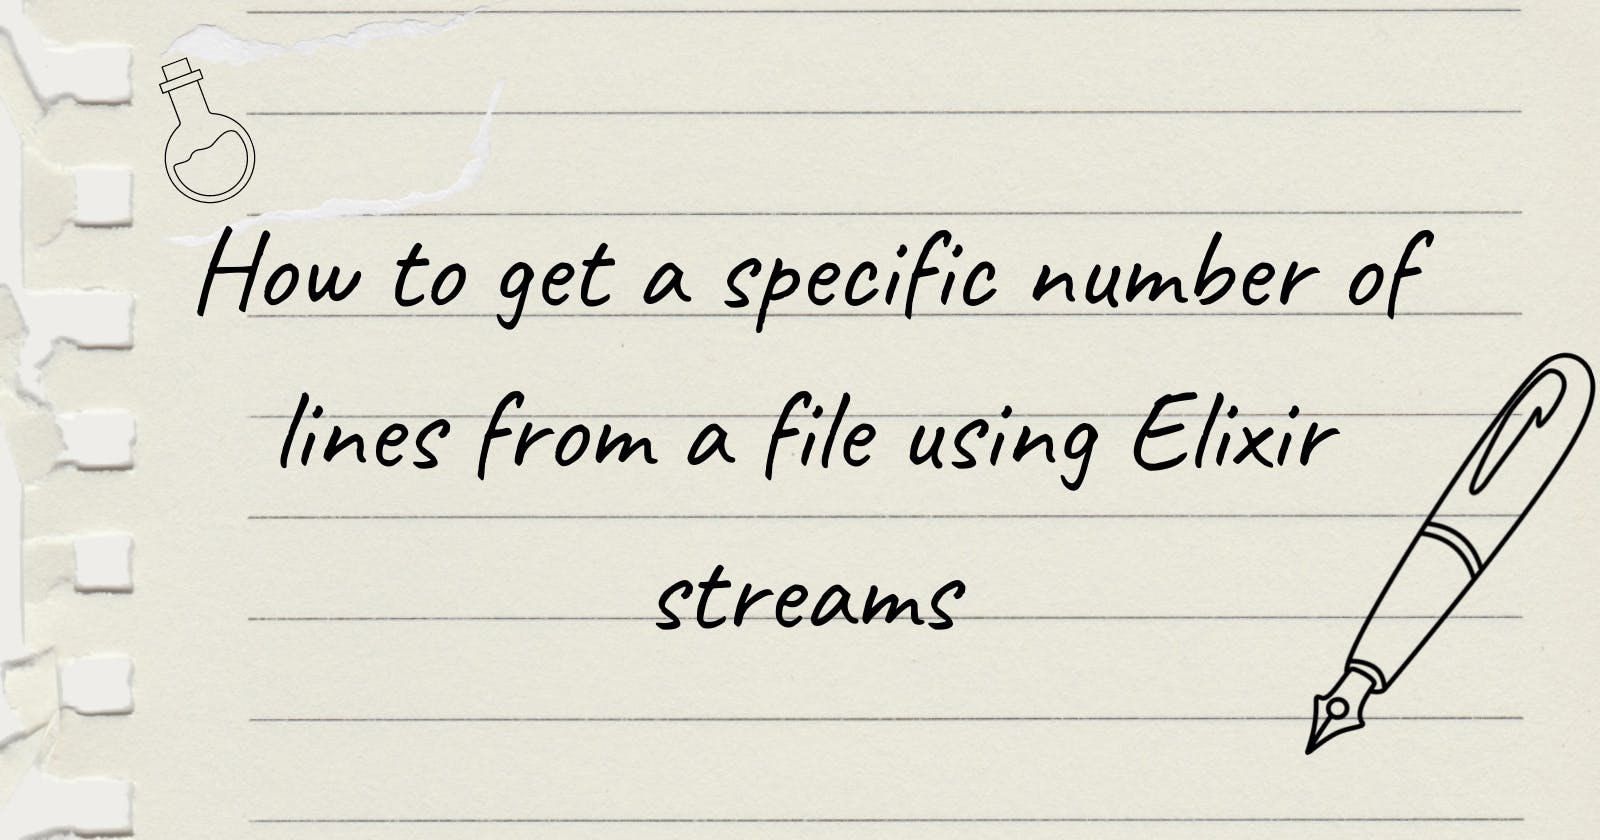 How to get a specific number of lines from a file using Elixir streams